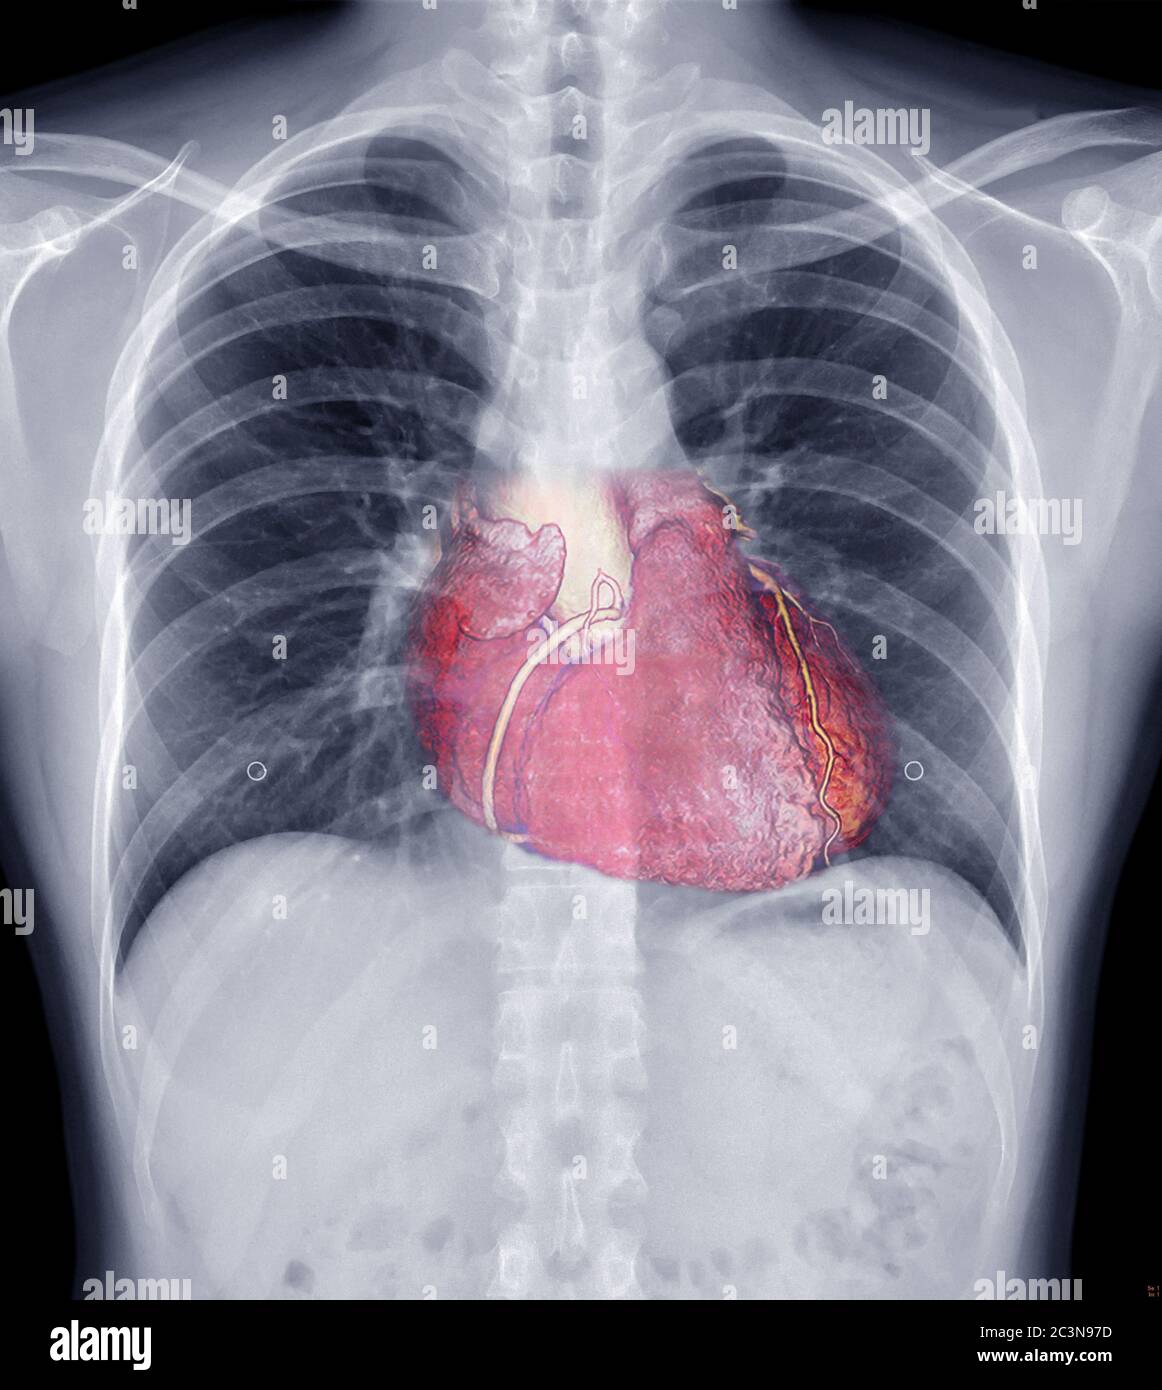 Mix Chest X-ray and 3D CTA Coronary arery Image showing heart inside ...